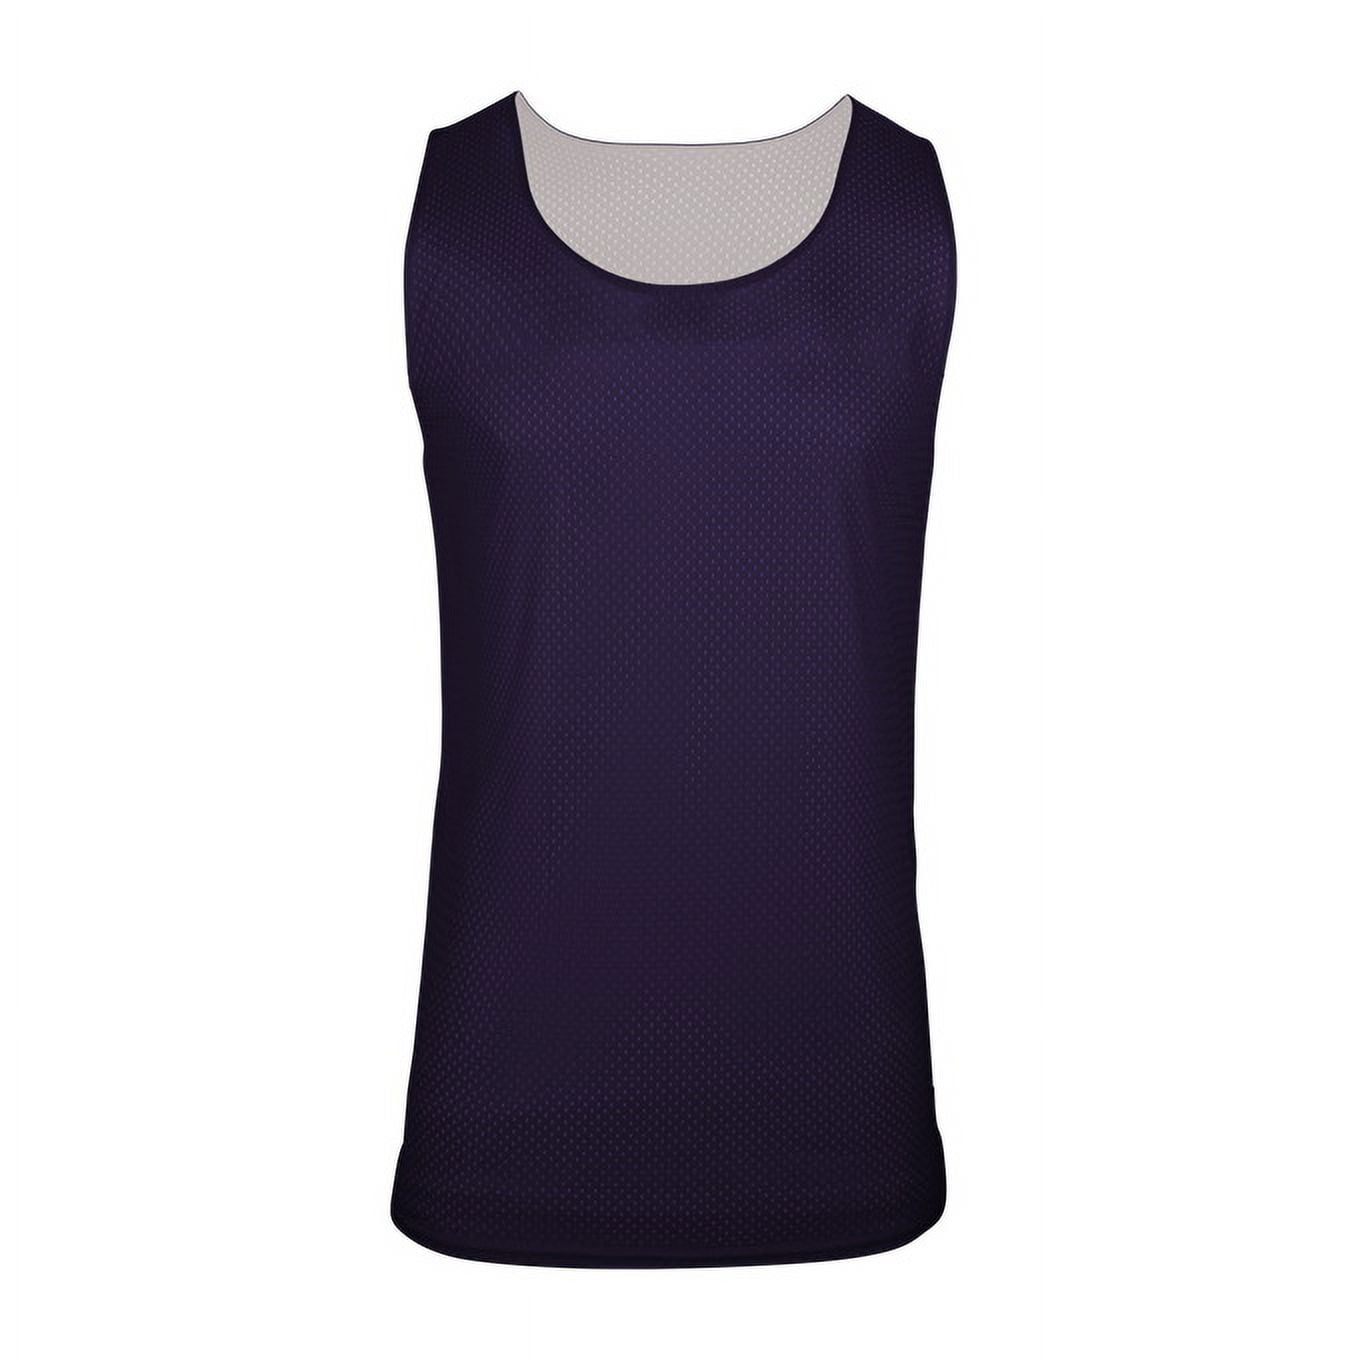 Sports Outdoors Womens Tank Tops